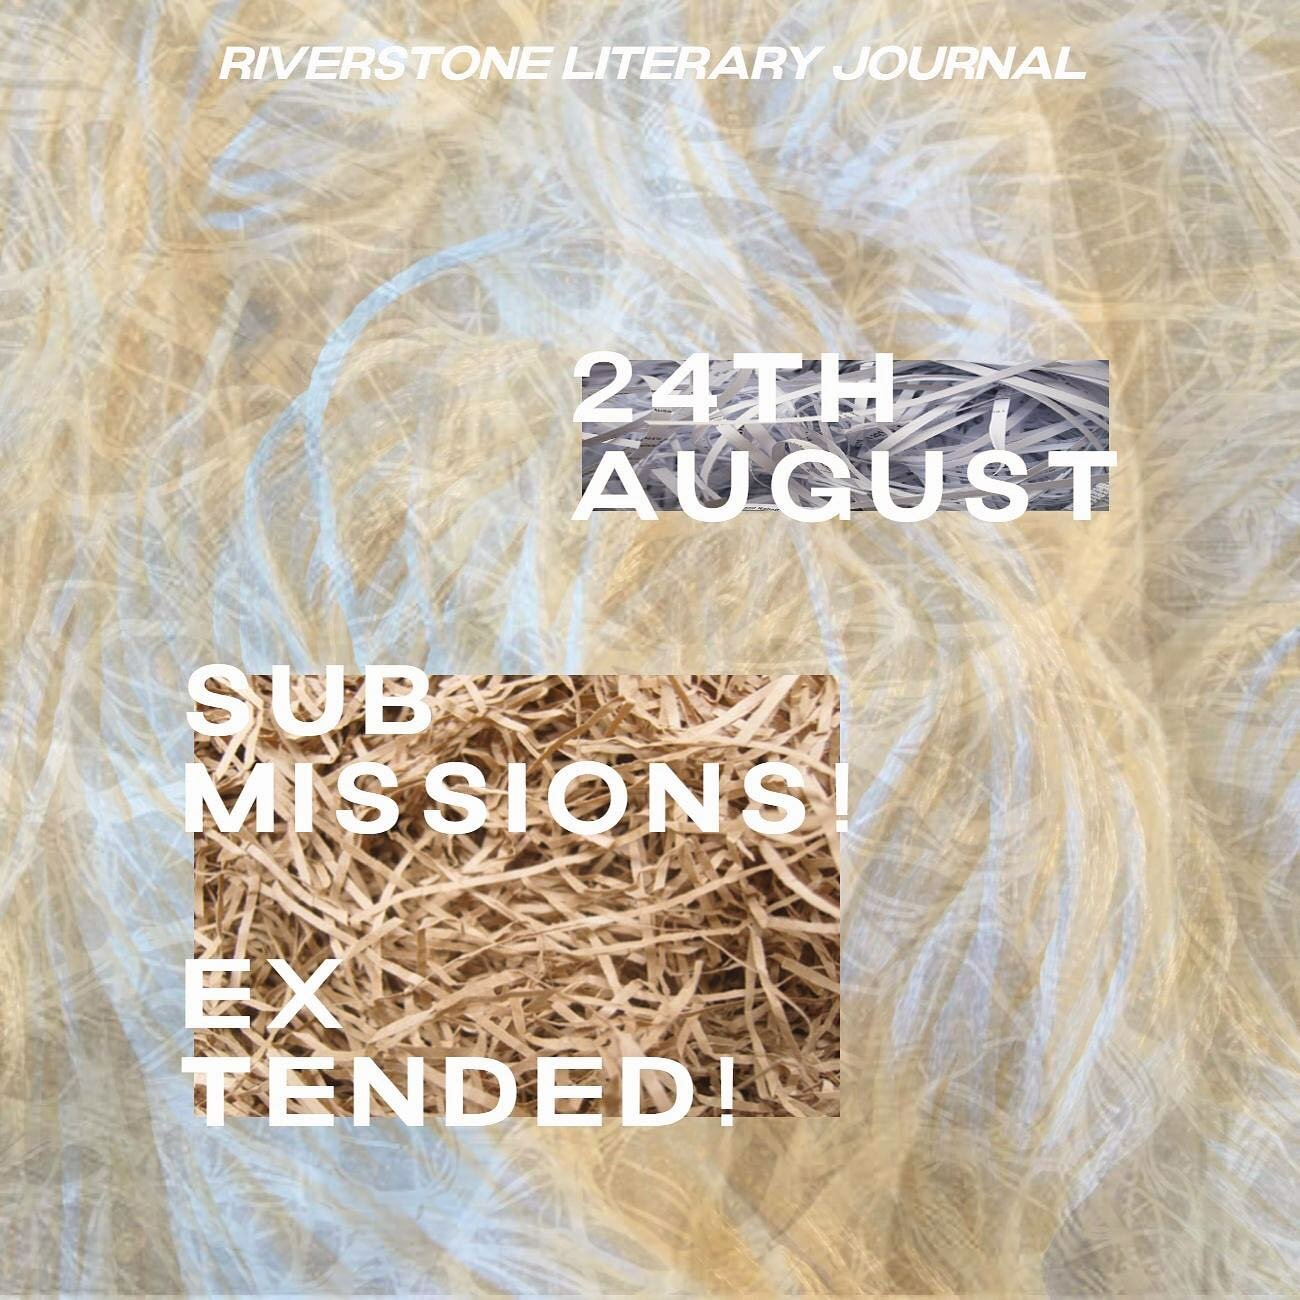 Submissions to ISSUE 3: THREAD have been extended another week! You now have til the 24th of August to send in your beautiful words via riverstonelit@gmail.com 💚